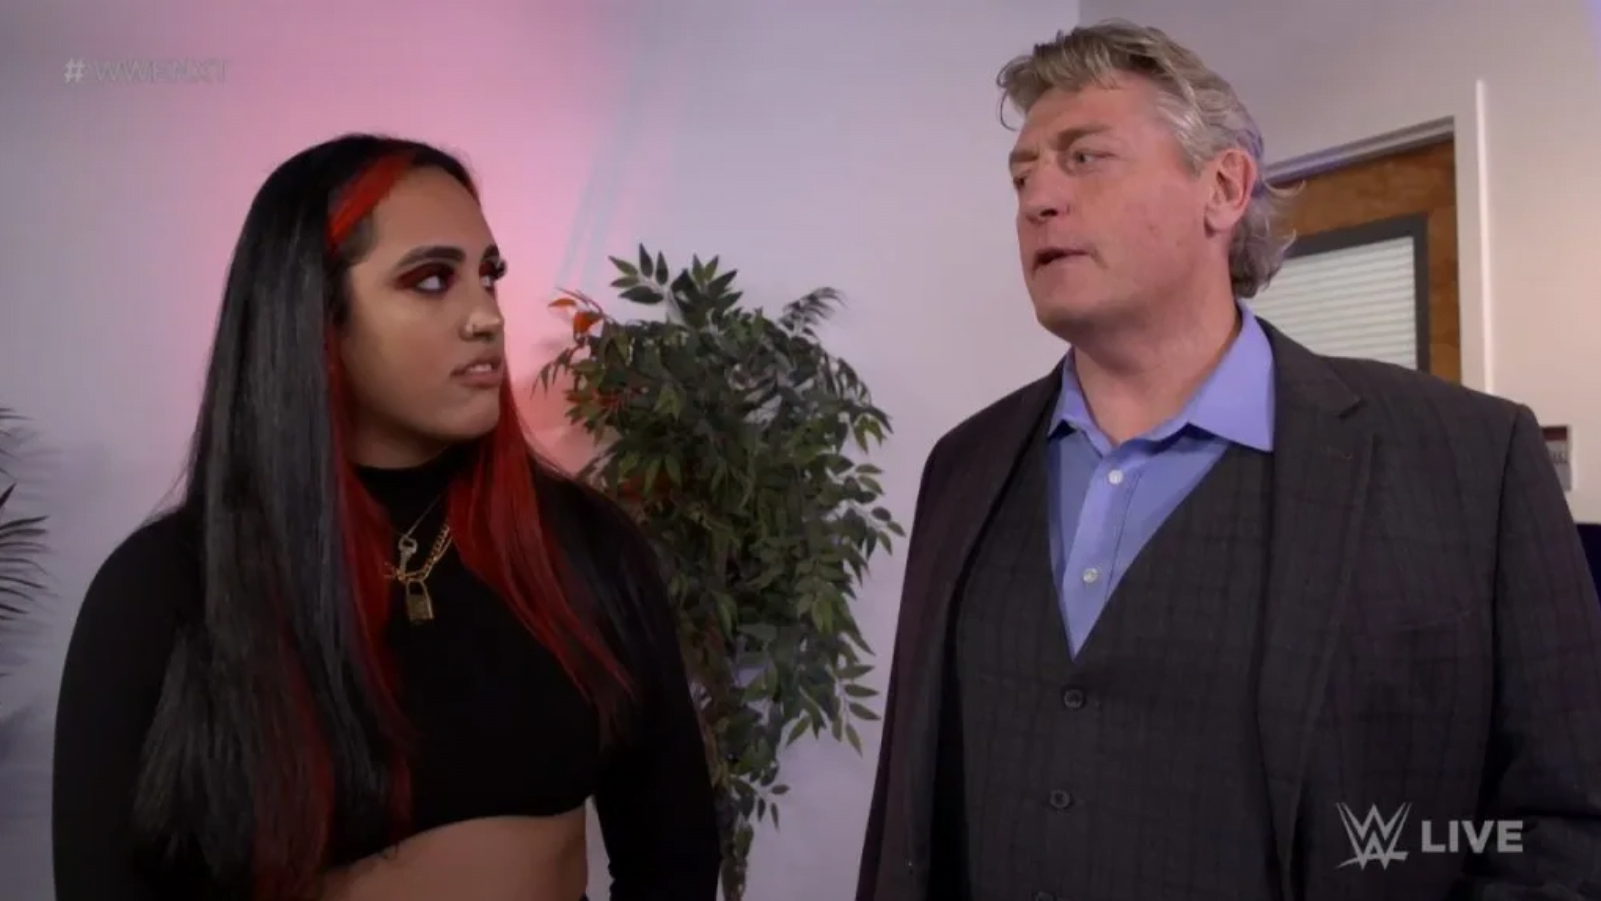 WWE NXT, William Regal Returns, General Manager